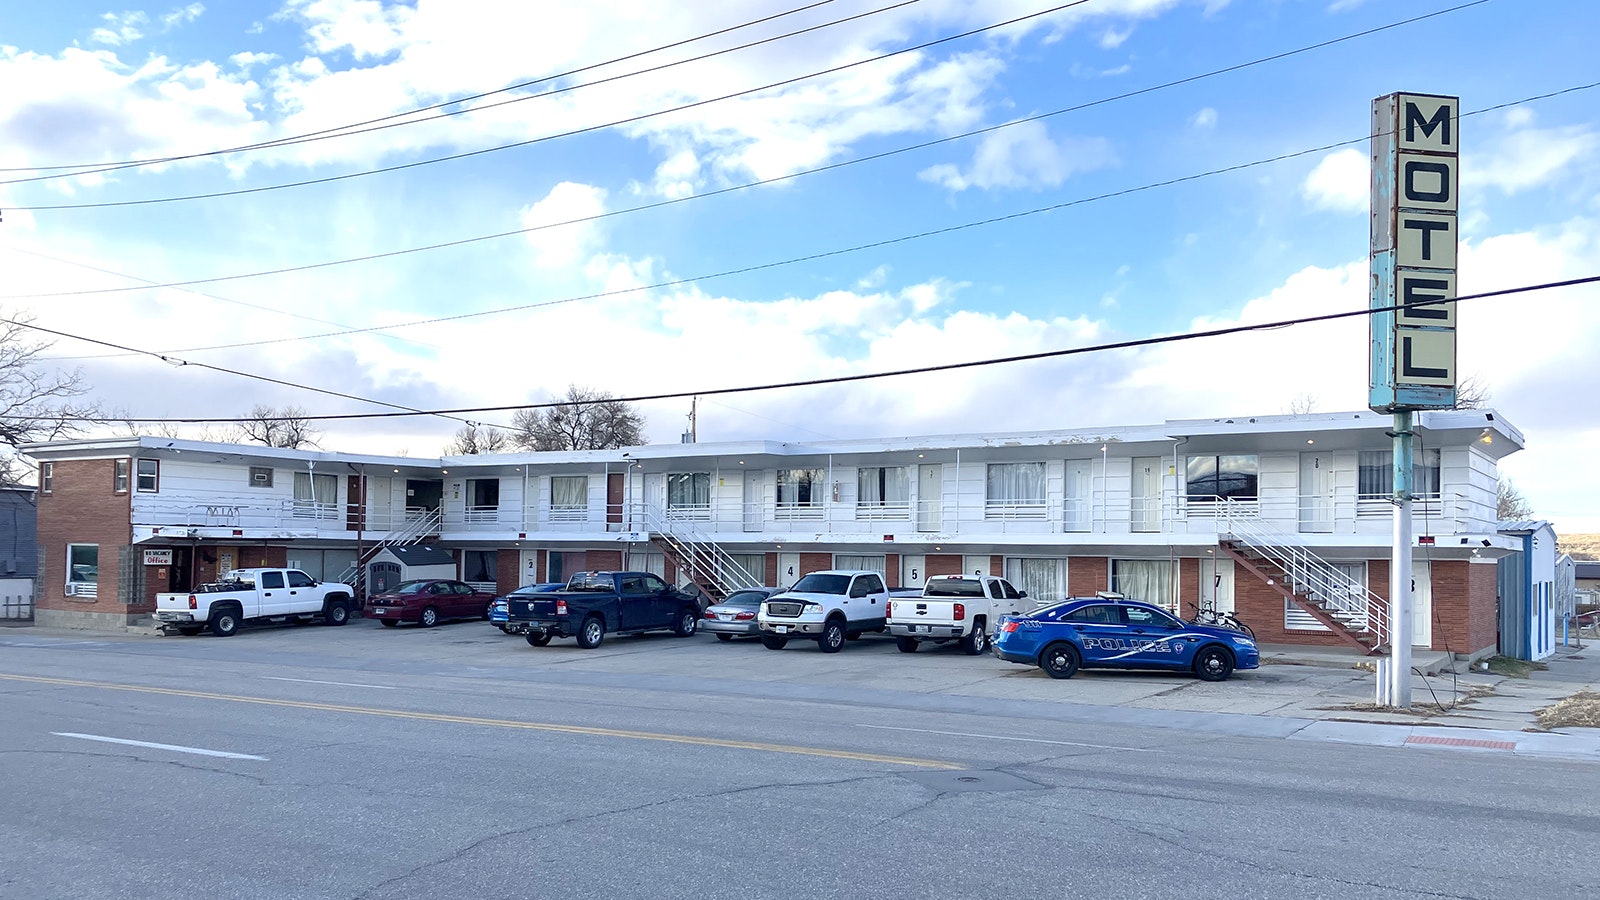 The body of a man was found dead Tuesday at the Topper Motel in Casper. Police won't confirm whether it's related to a man who confessed in open court Wednesday that he killed someone Tuesday.